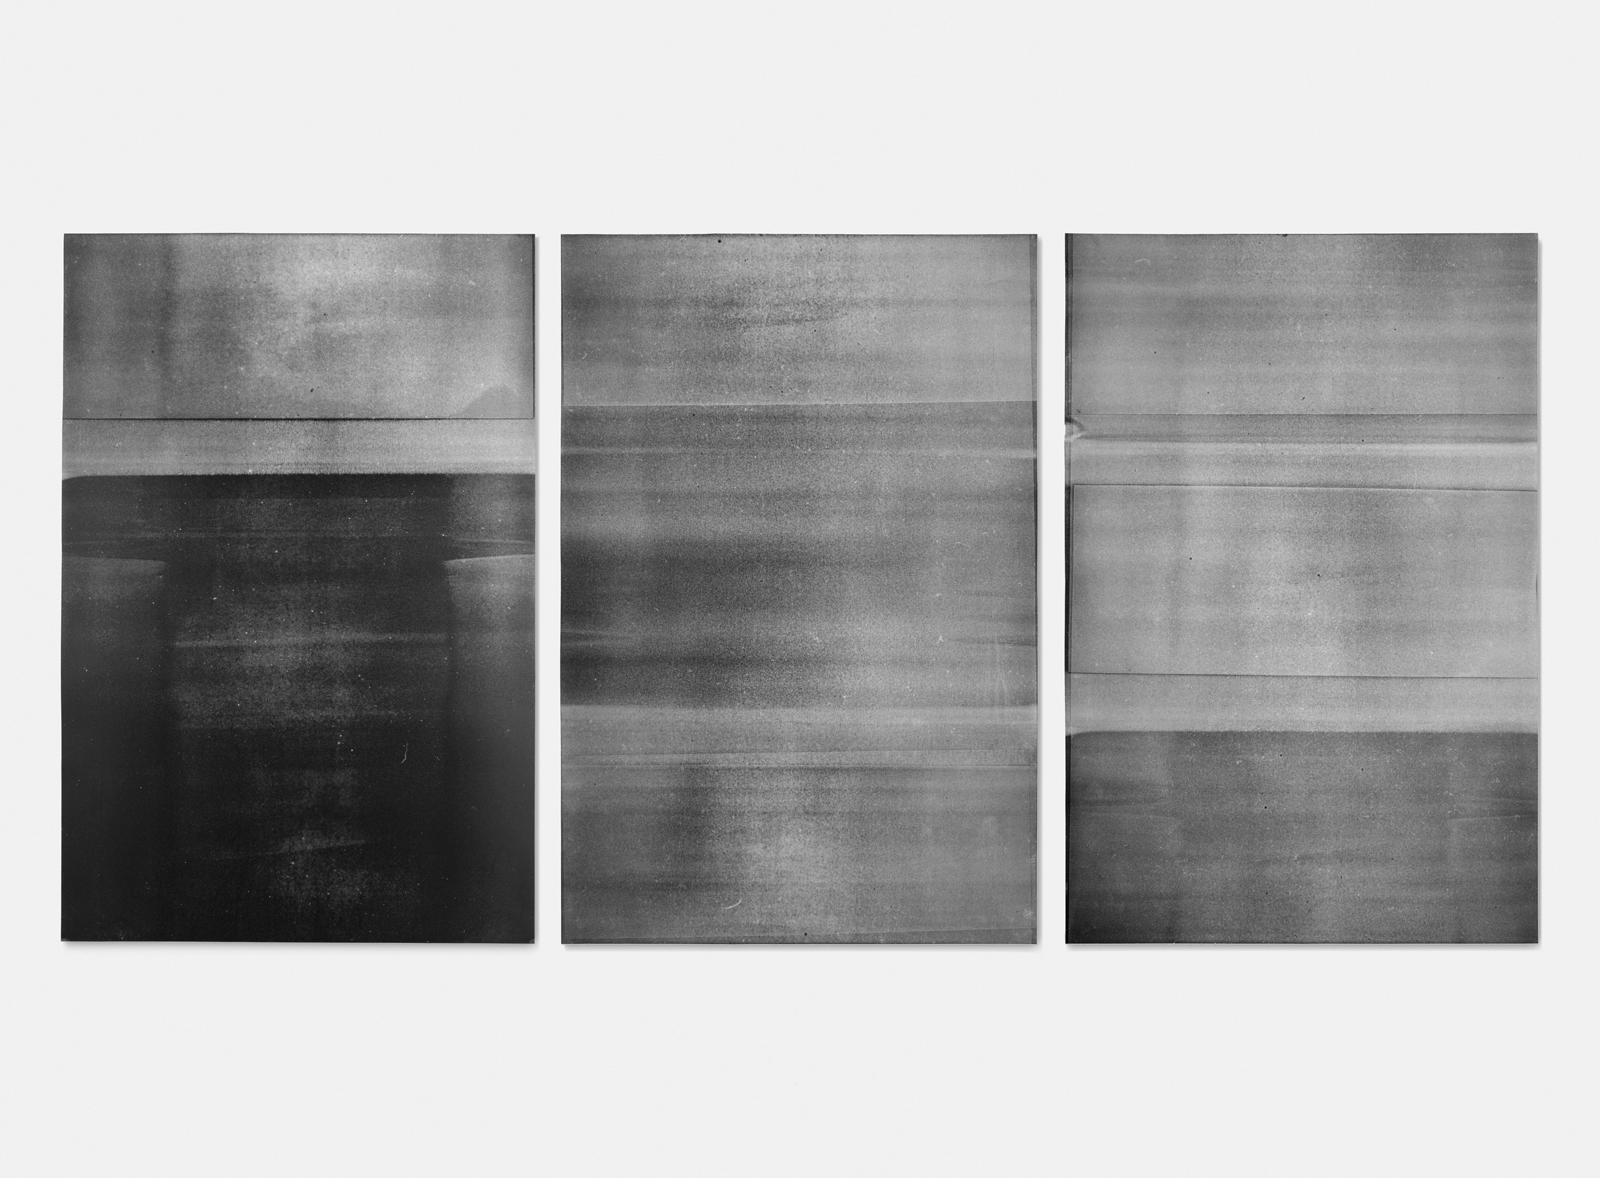   Untitled (mylar #1, #2, and #3, from the ongoing series reflected/repeated)  2014, oil based ink painted onto mylar 24 x 36 inches each 